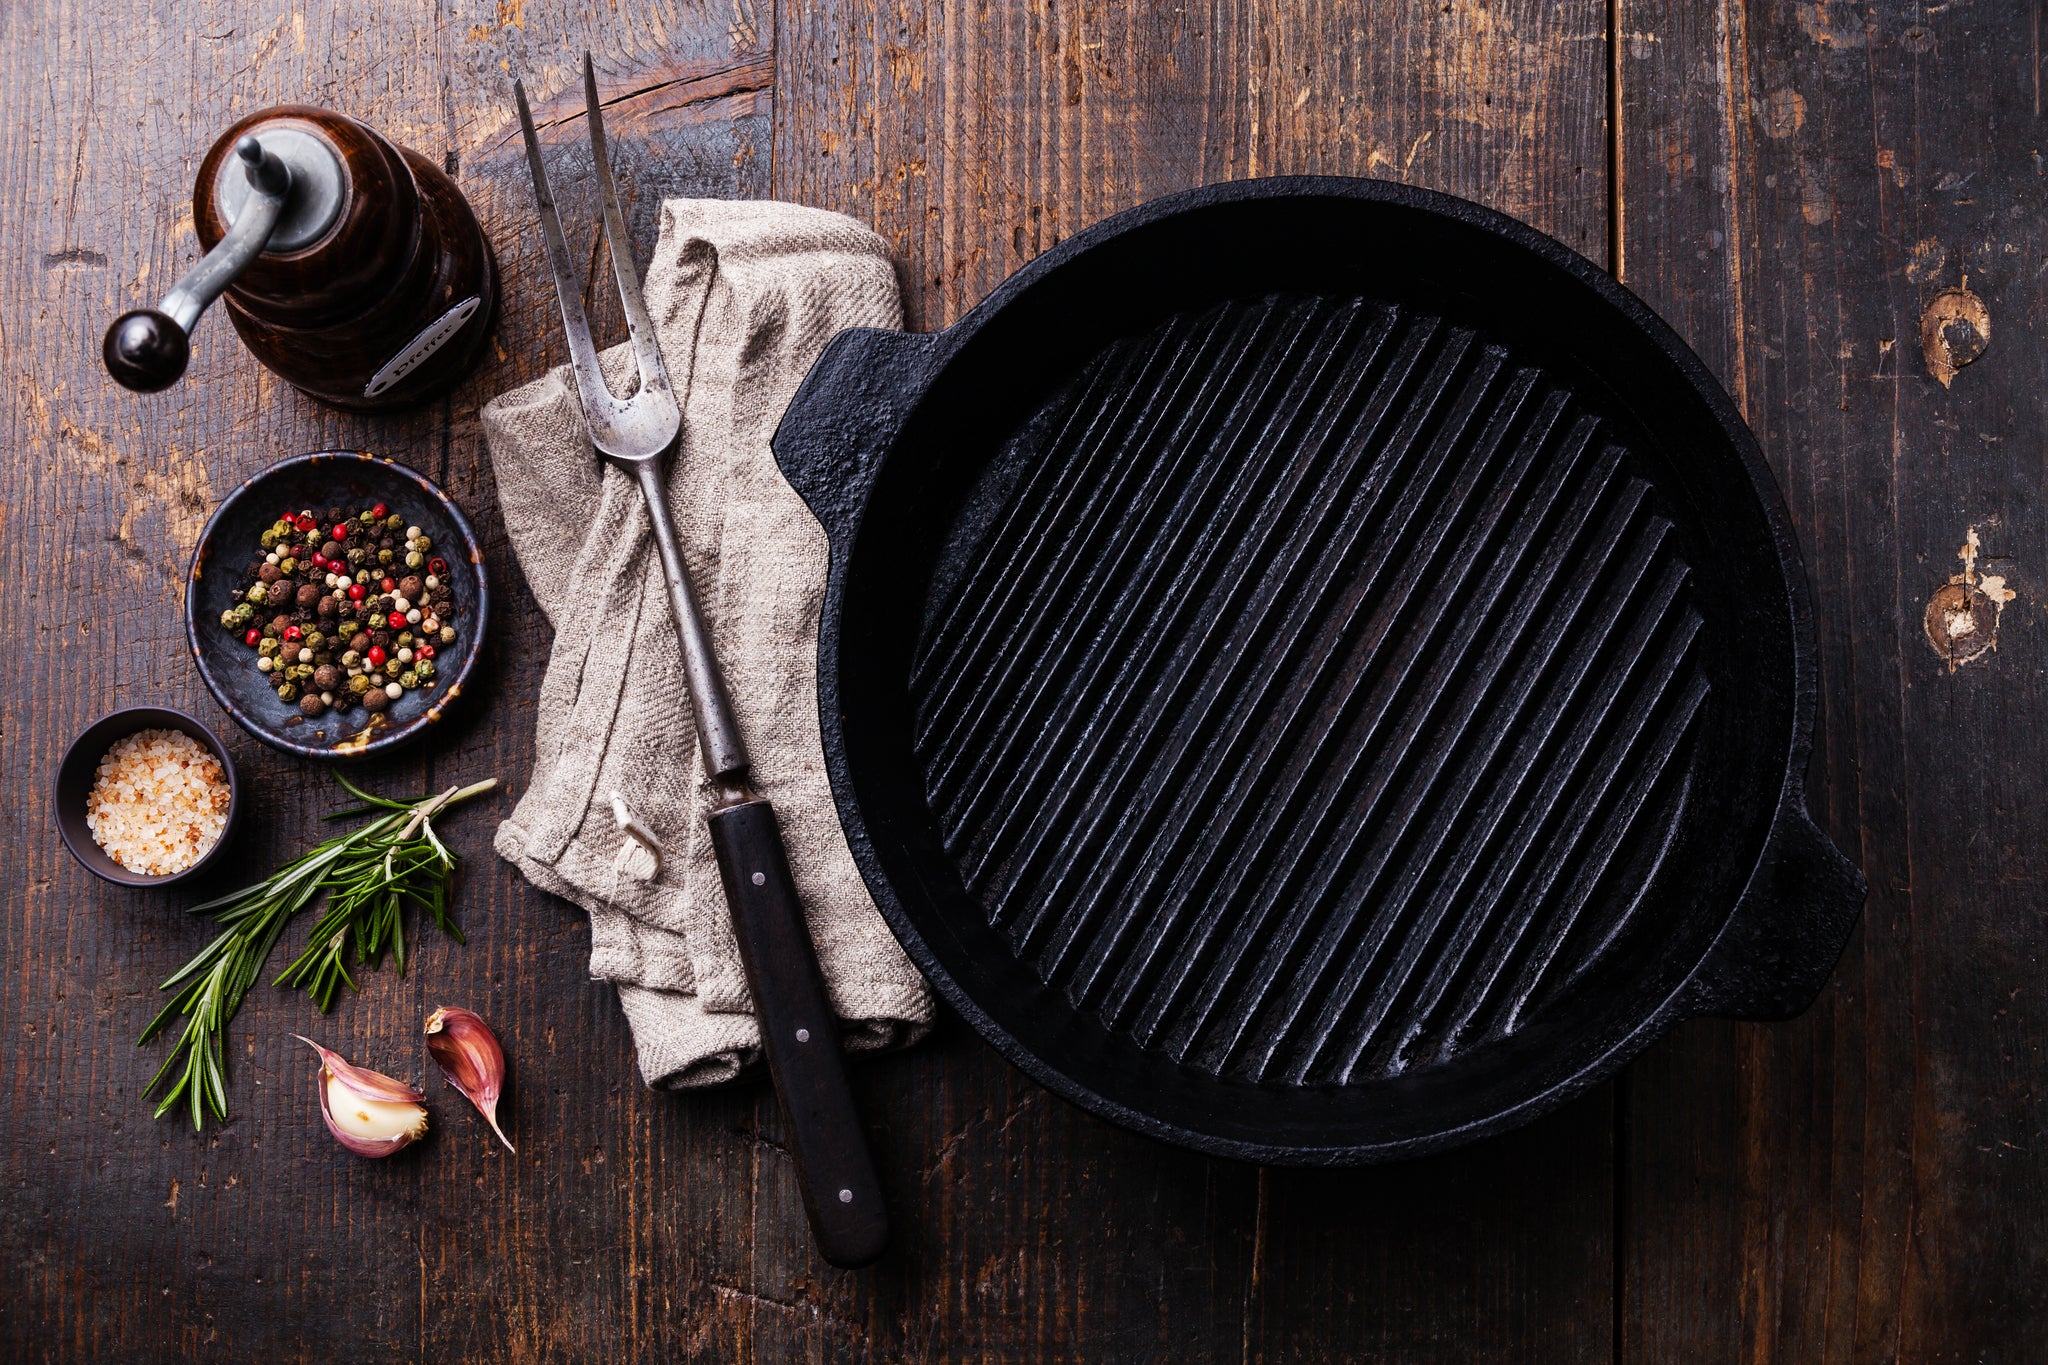 How to Season Cast Iron Cookware: The Ultimate Guide